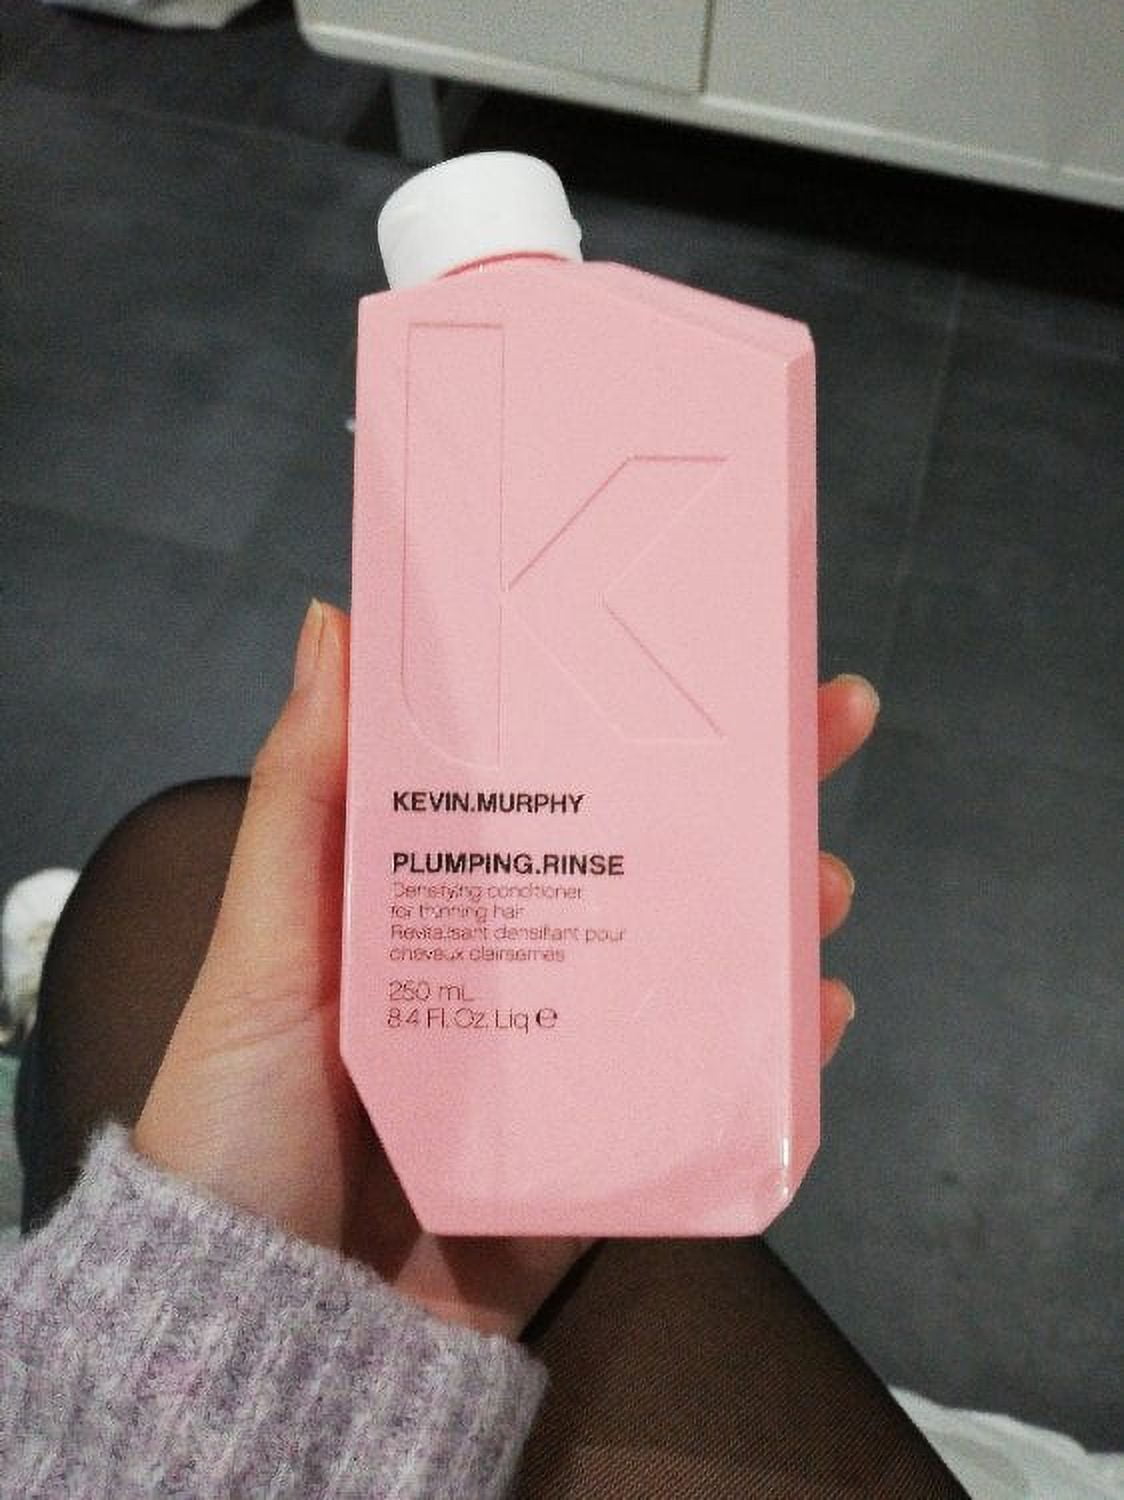 KEVIN MURPHY Plumping Wash, 8.4 Ounce